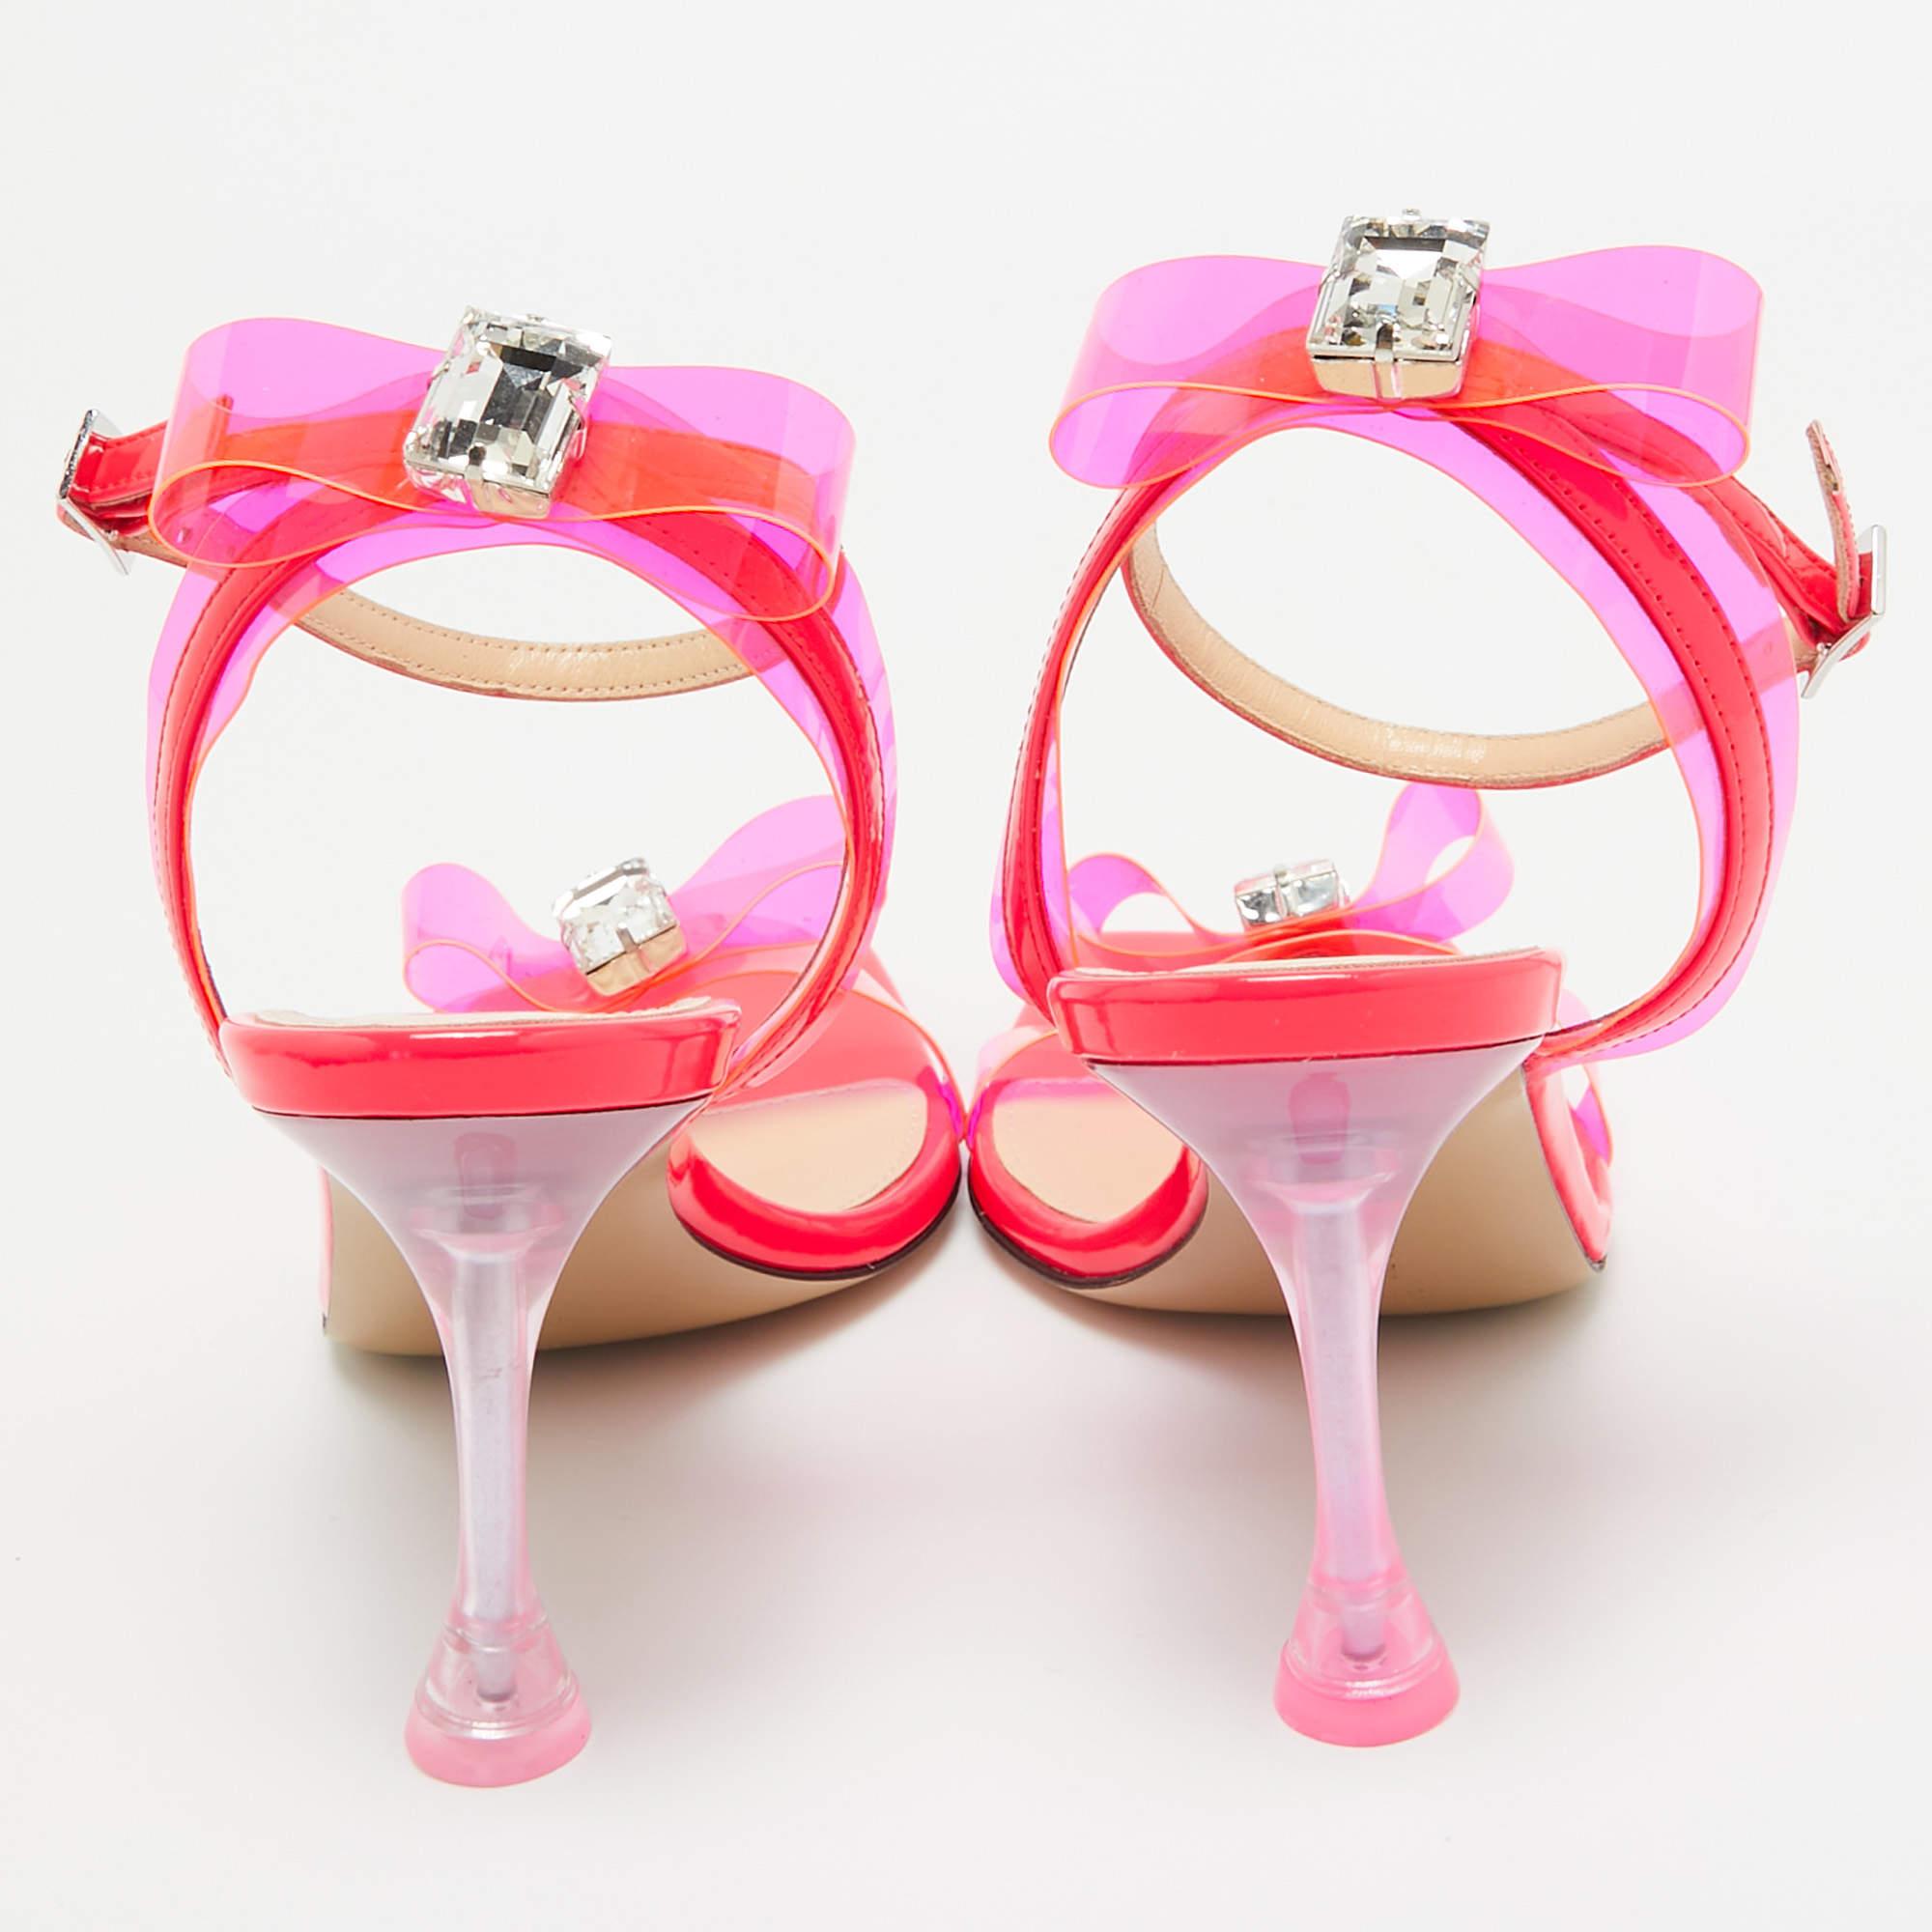 Mach & Mach Neon Pink PVC and Patent Leather French Bow Sandals Size 40.5 In Excellent Condition For Sale In Dubai, Al Qouz 2